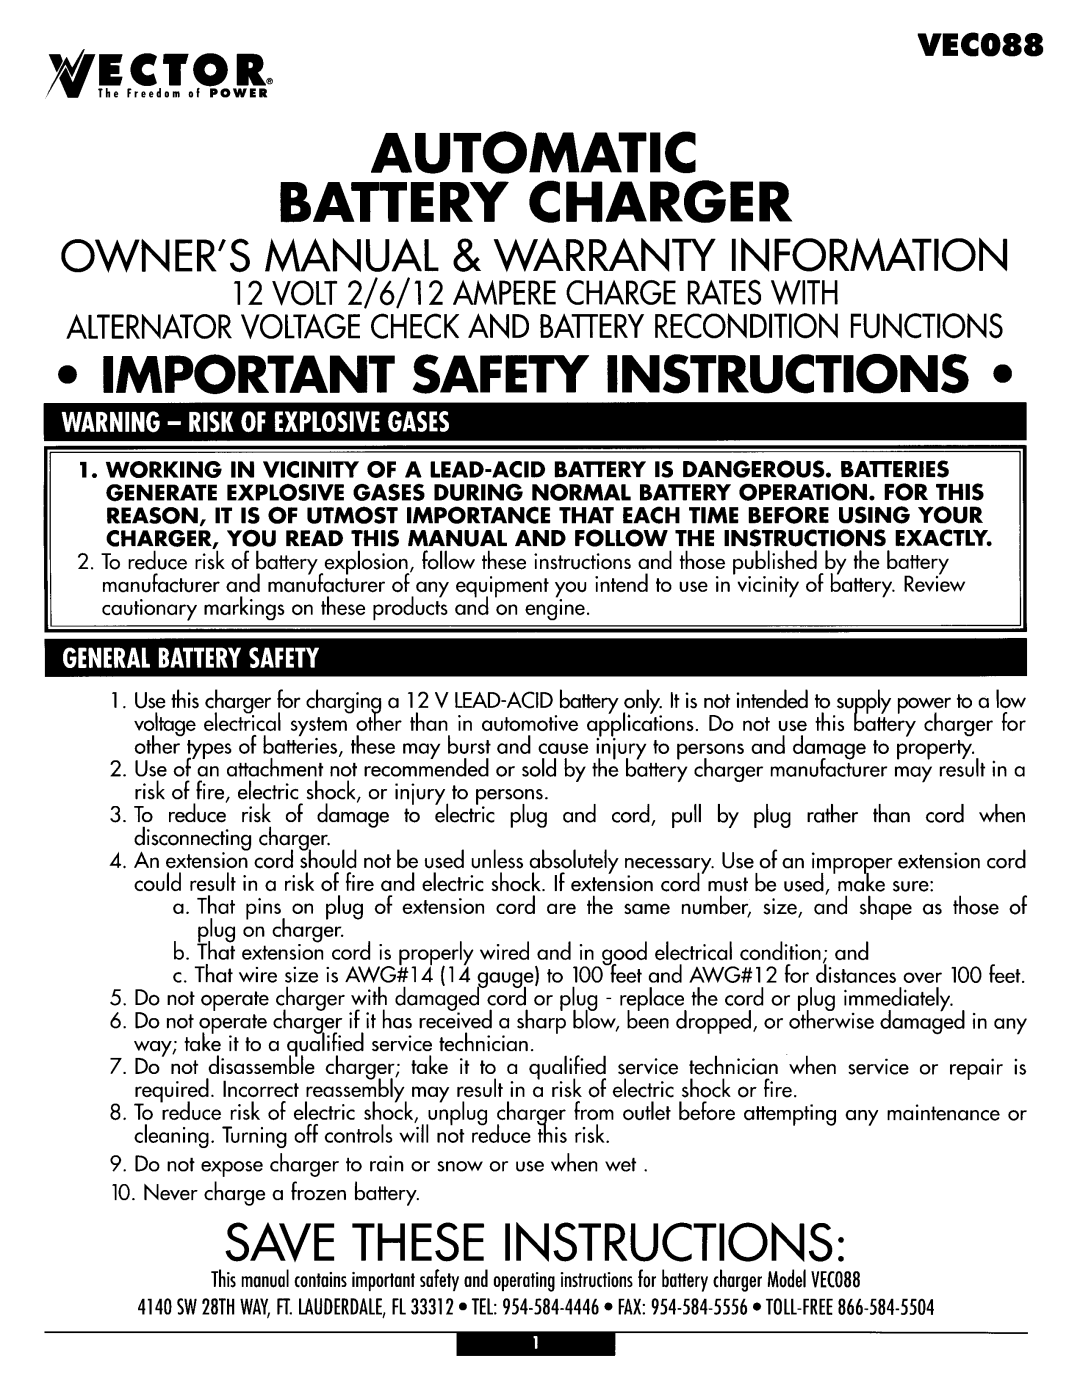 Vector Automatic Battery Charger, VEC088 manual 